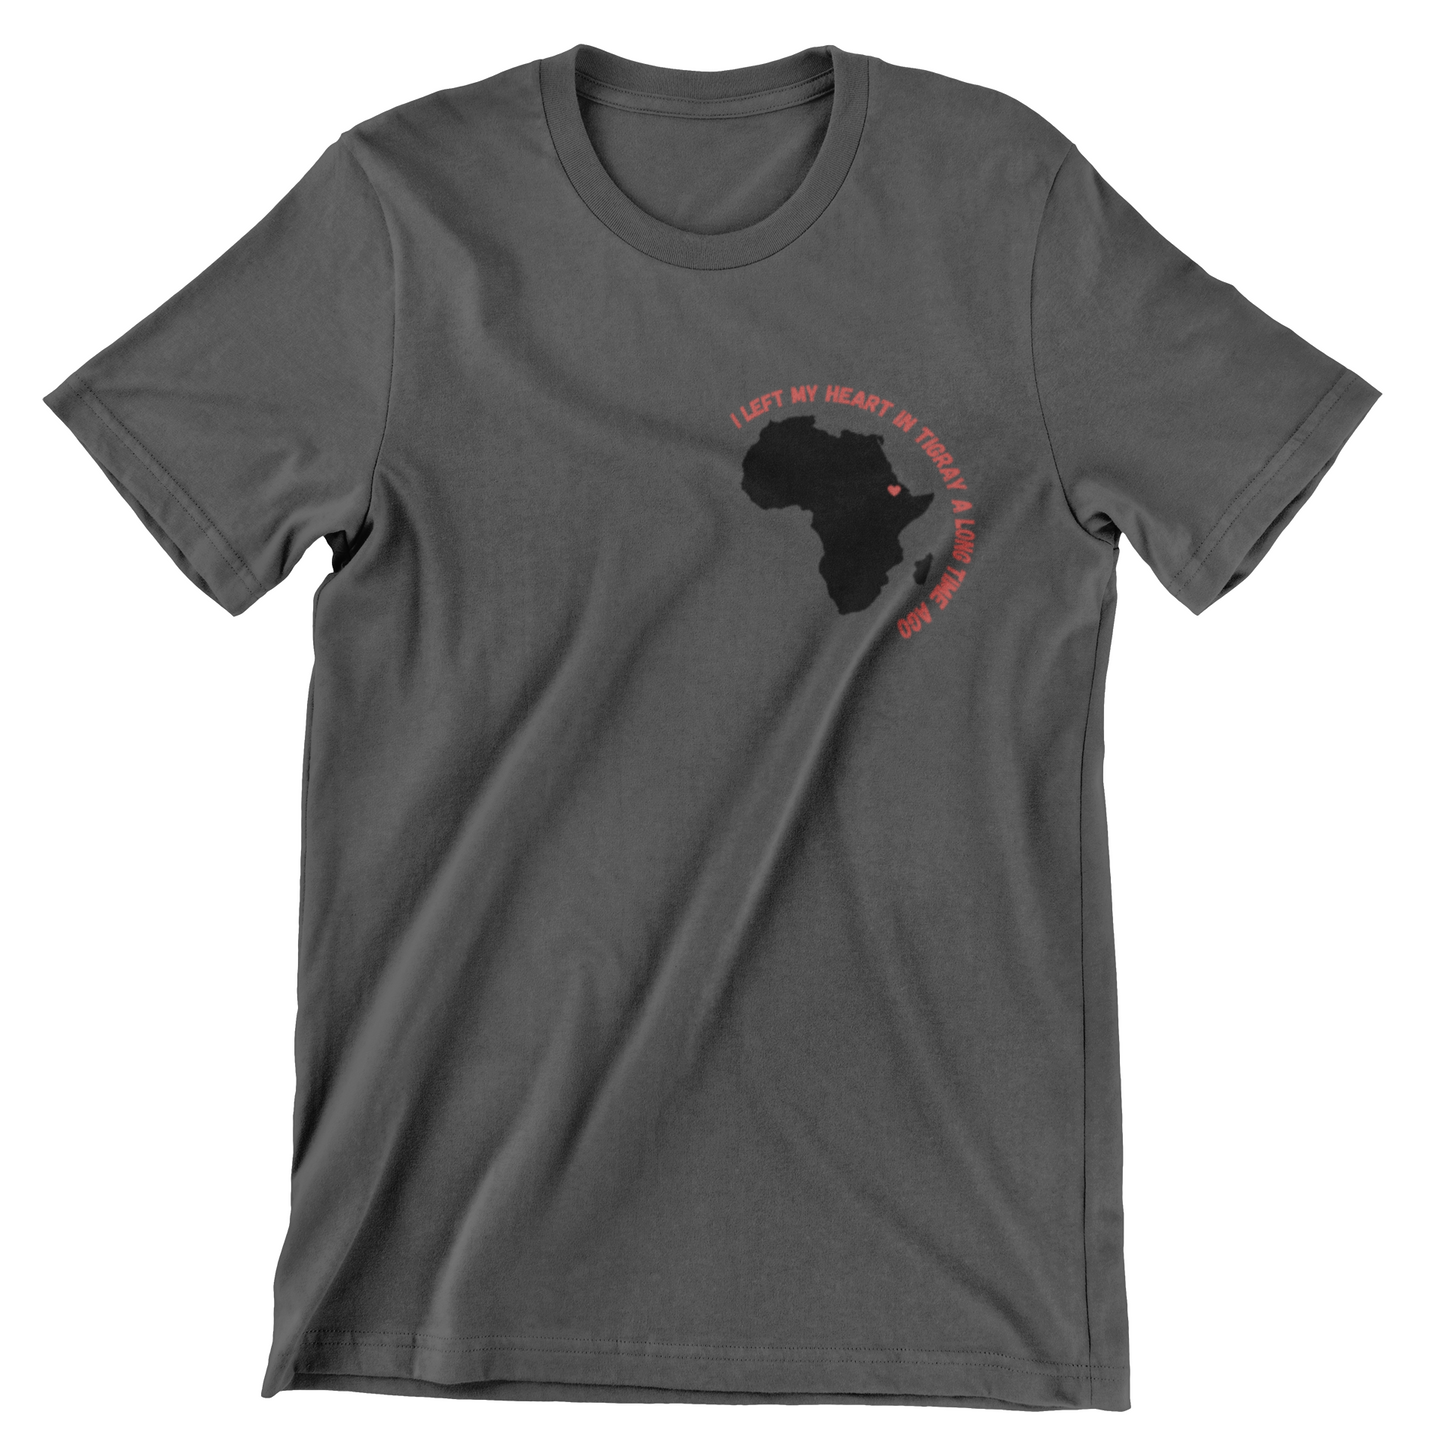 I Left My Heart In Tigray A Long Time Ago Unisex T-Shirt: 100% of Proceeds Donated to HPN4Tigray